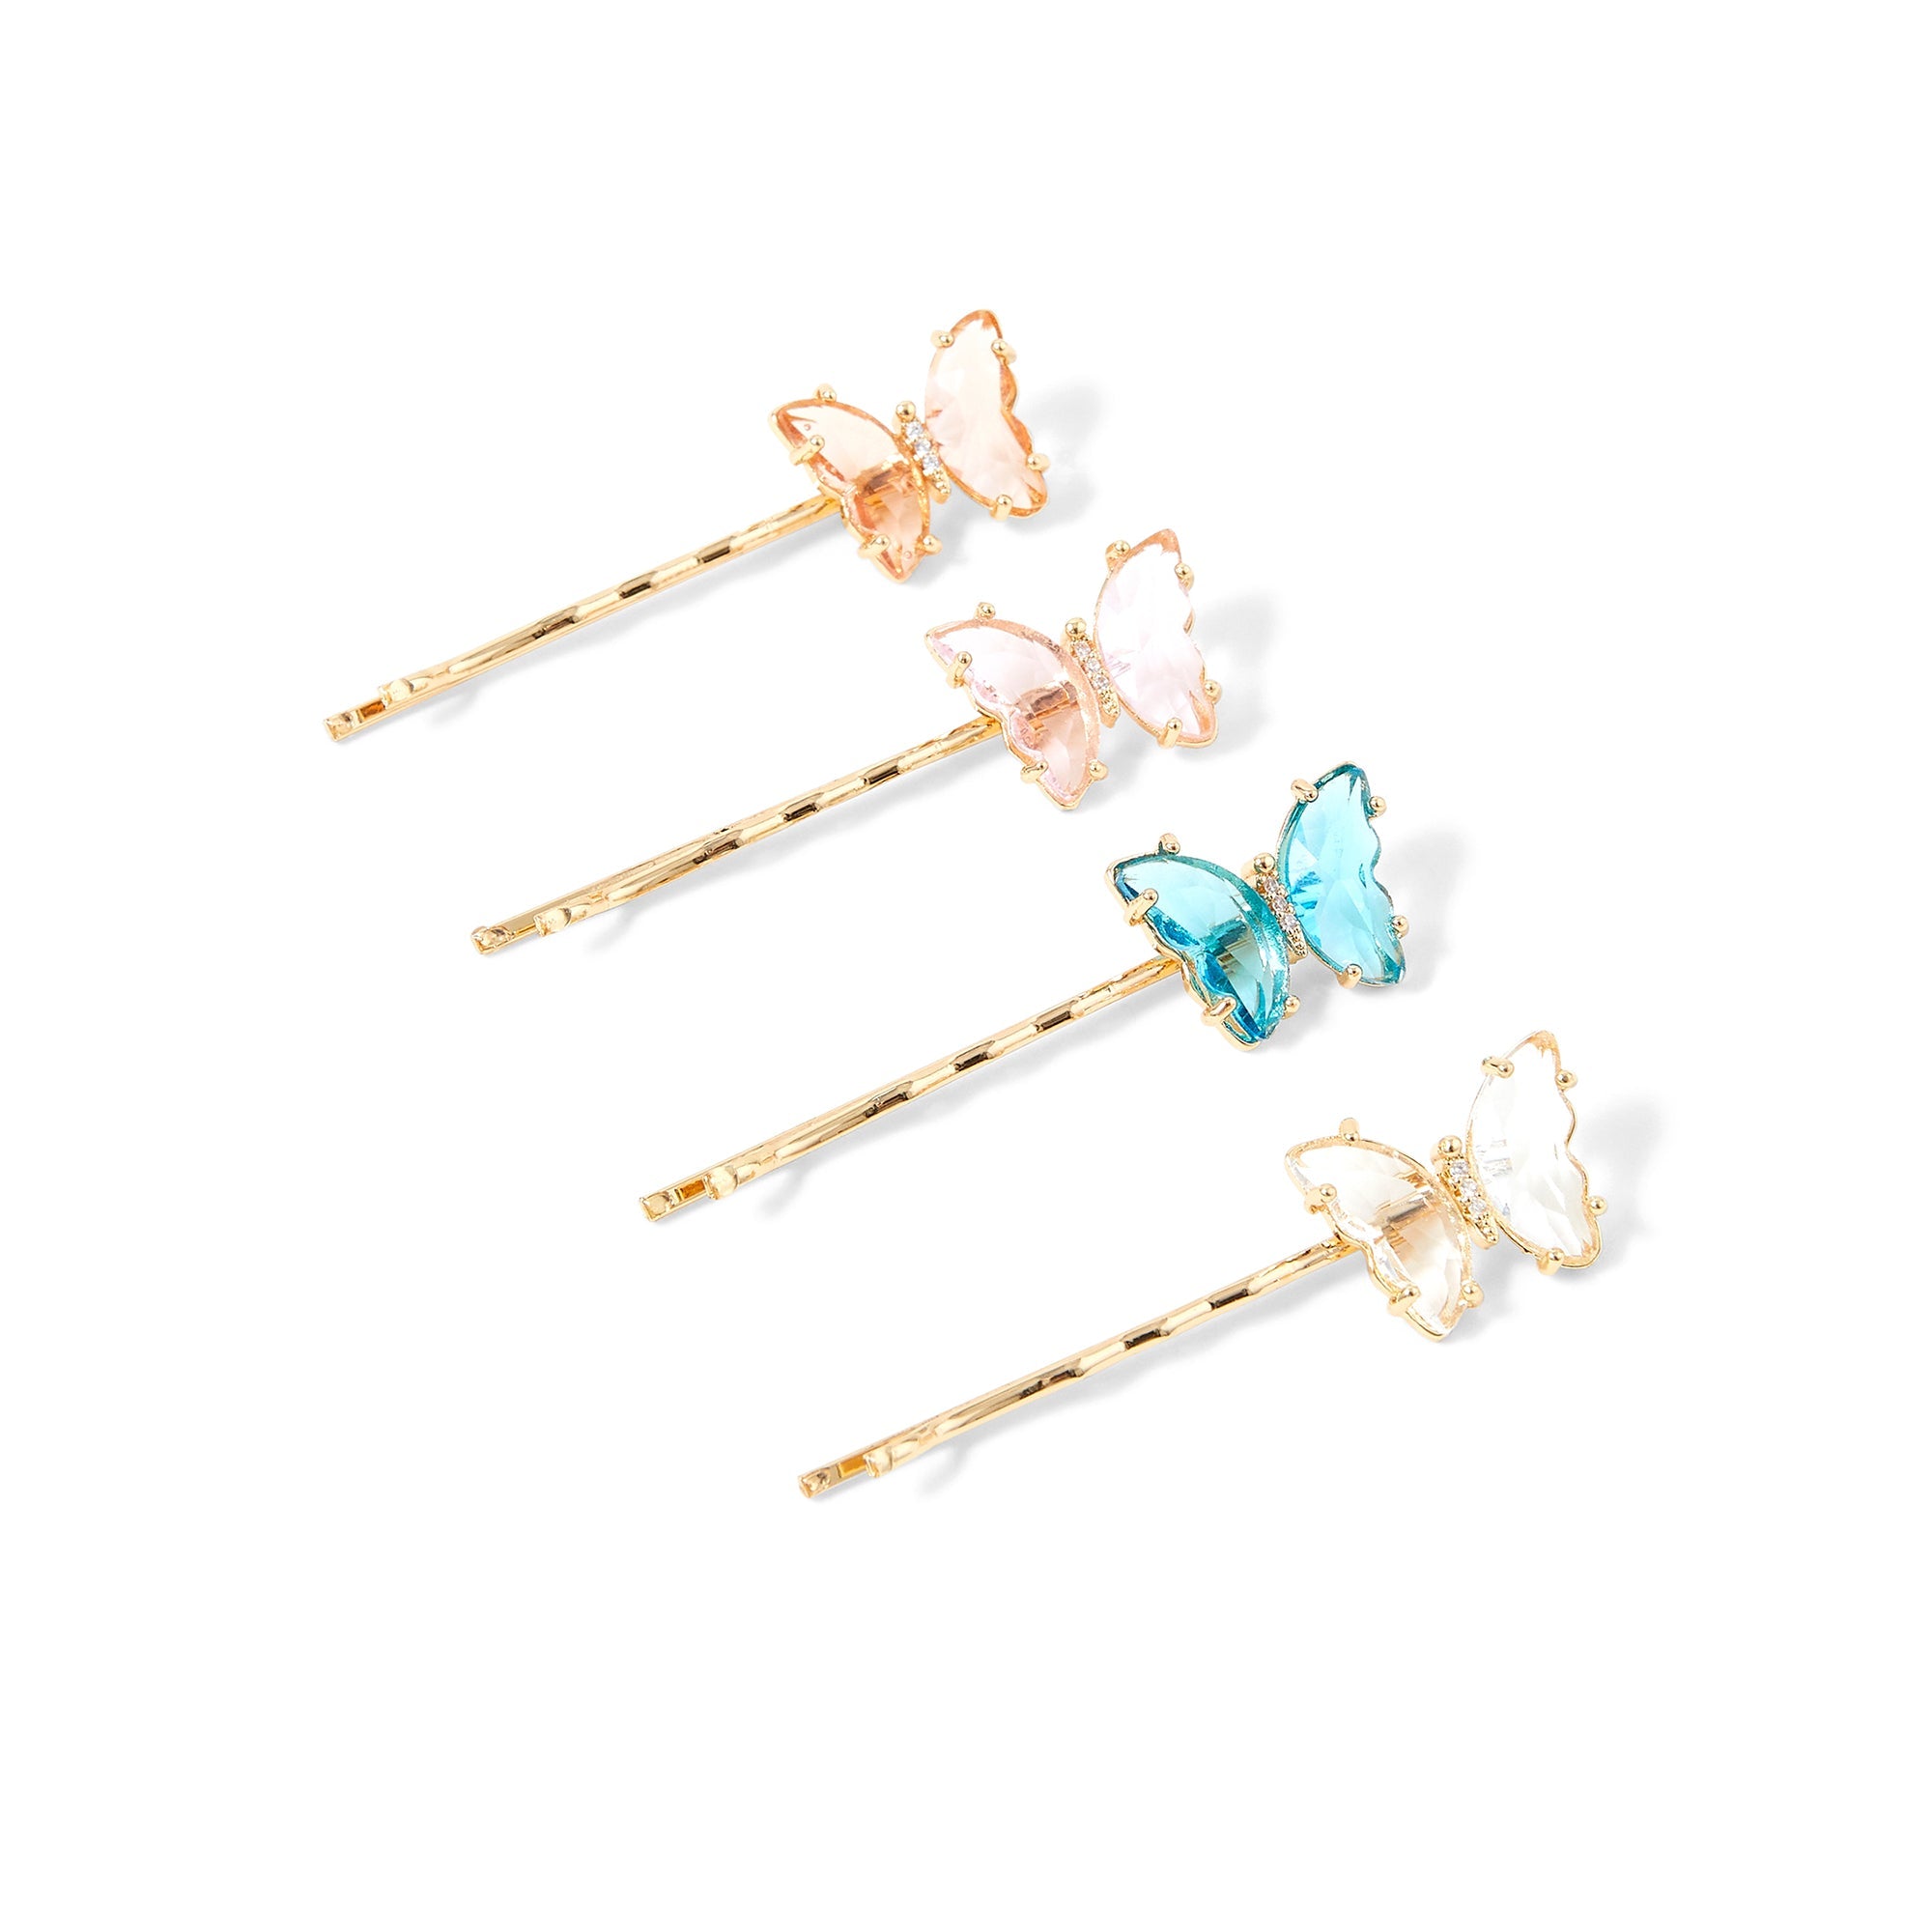 Accessorize London Women's Set of 4 Crystal Butterfly Slide Hair Clip pack